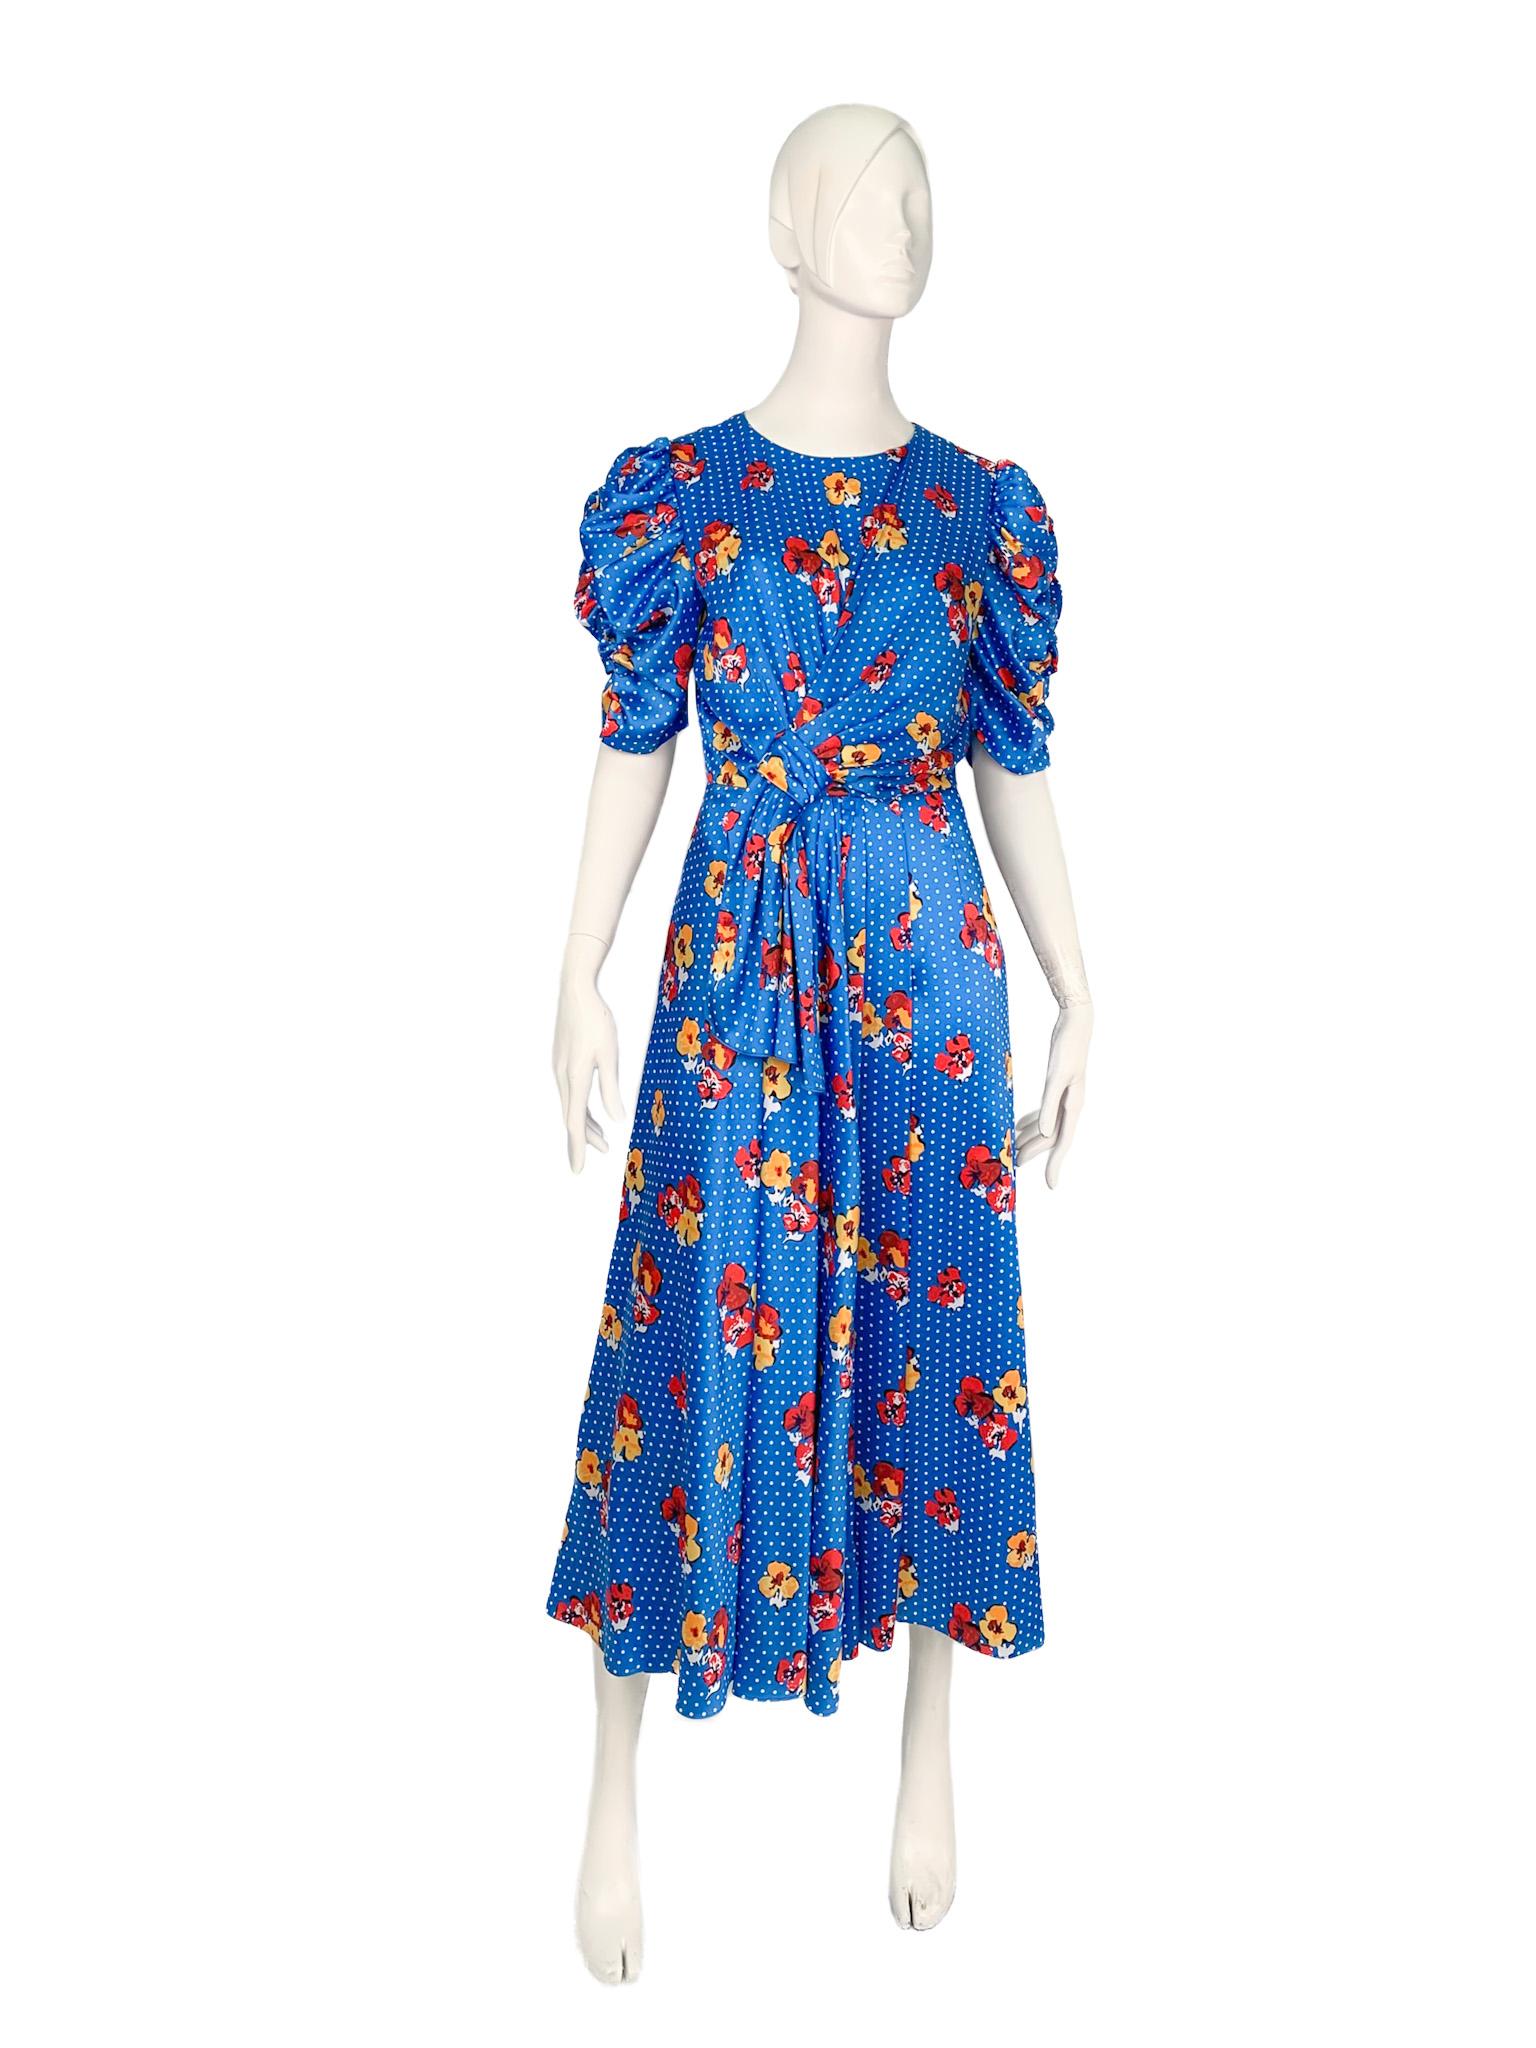 Silk maxi dress with an all-over floral/polka dot pattern, draped ruffled sleeves and decorative knot and tie detail at the front. A beautiful example of Carolina Herrera's outstanding (and widely recognised) mastery in designing sleeves. Retail